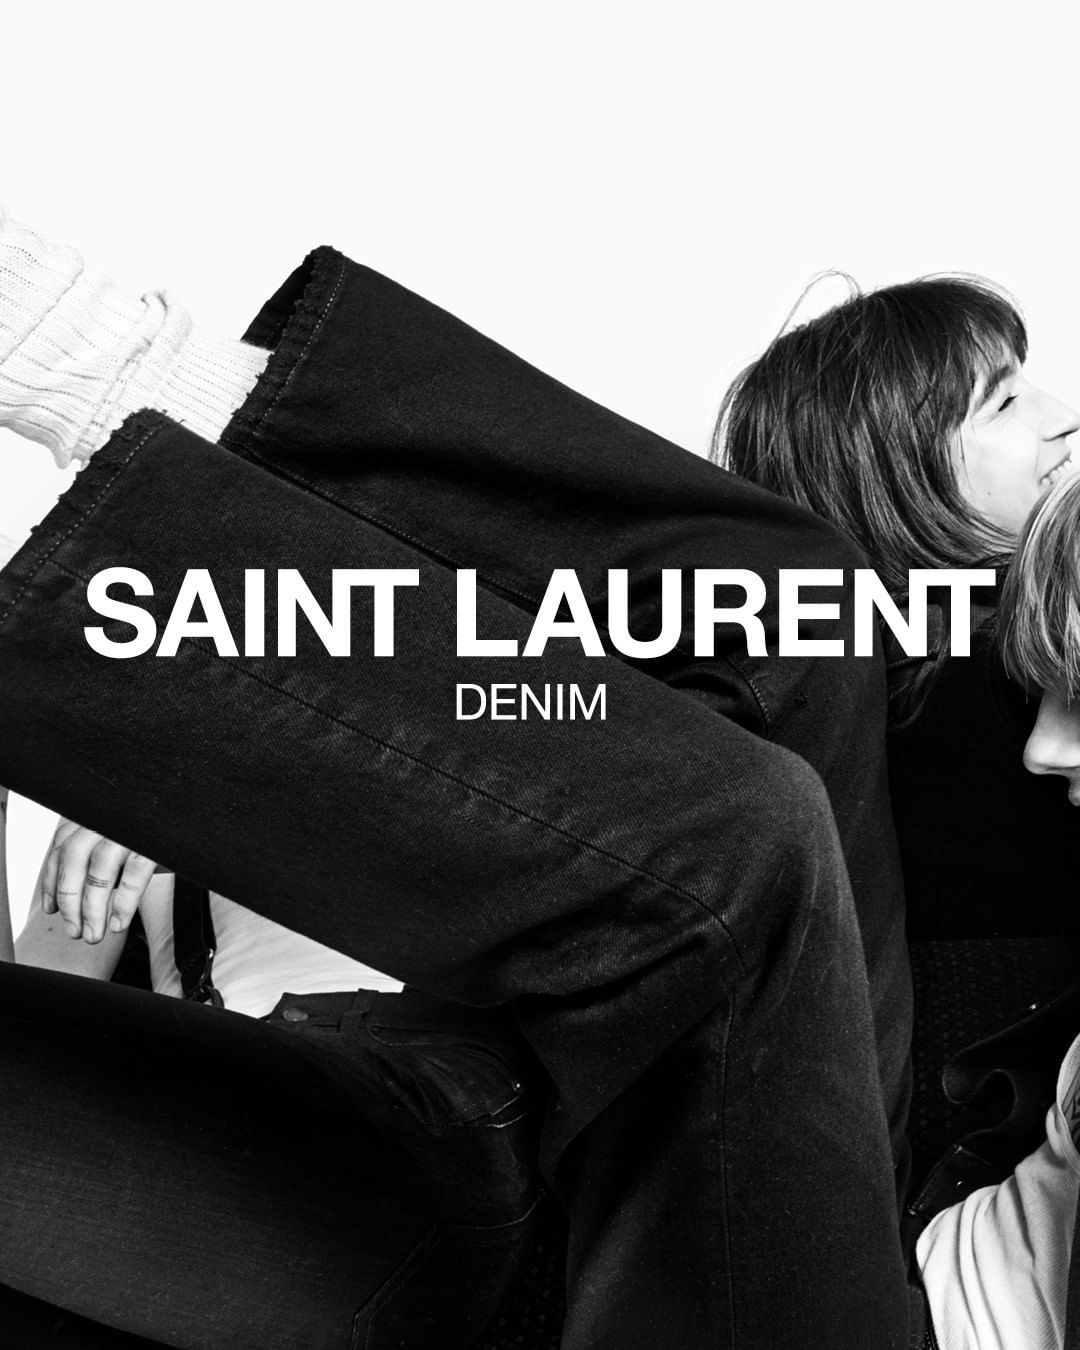 Paul Sinclaire | Saint Laurent Free Spirit Campaign 2020 | Saint Laurent Free Spirit campaign directed by Gray Sorrenti and styled by Paul Sinclaire. | 7